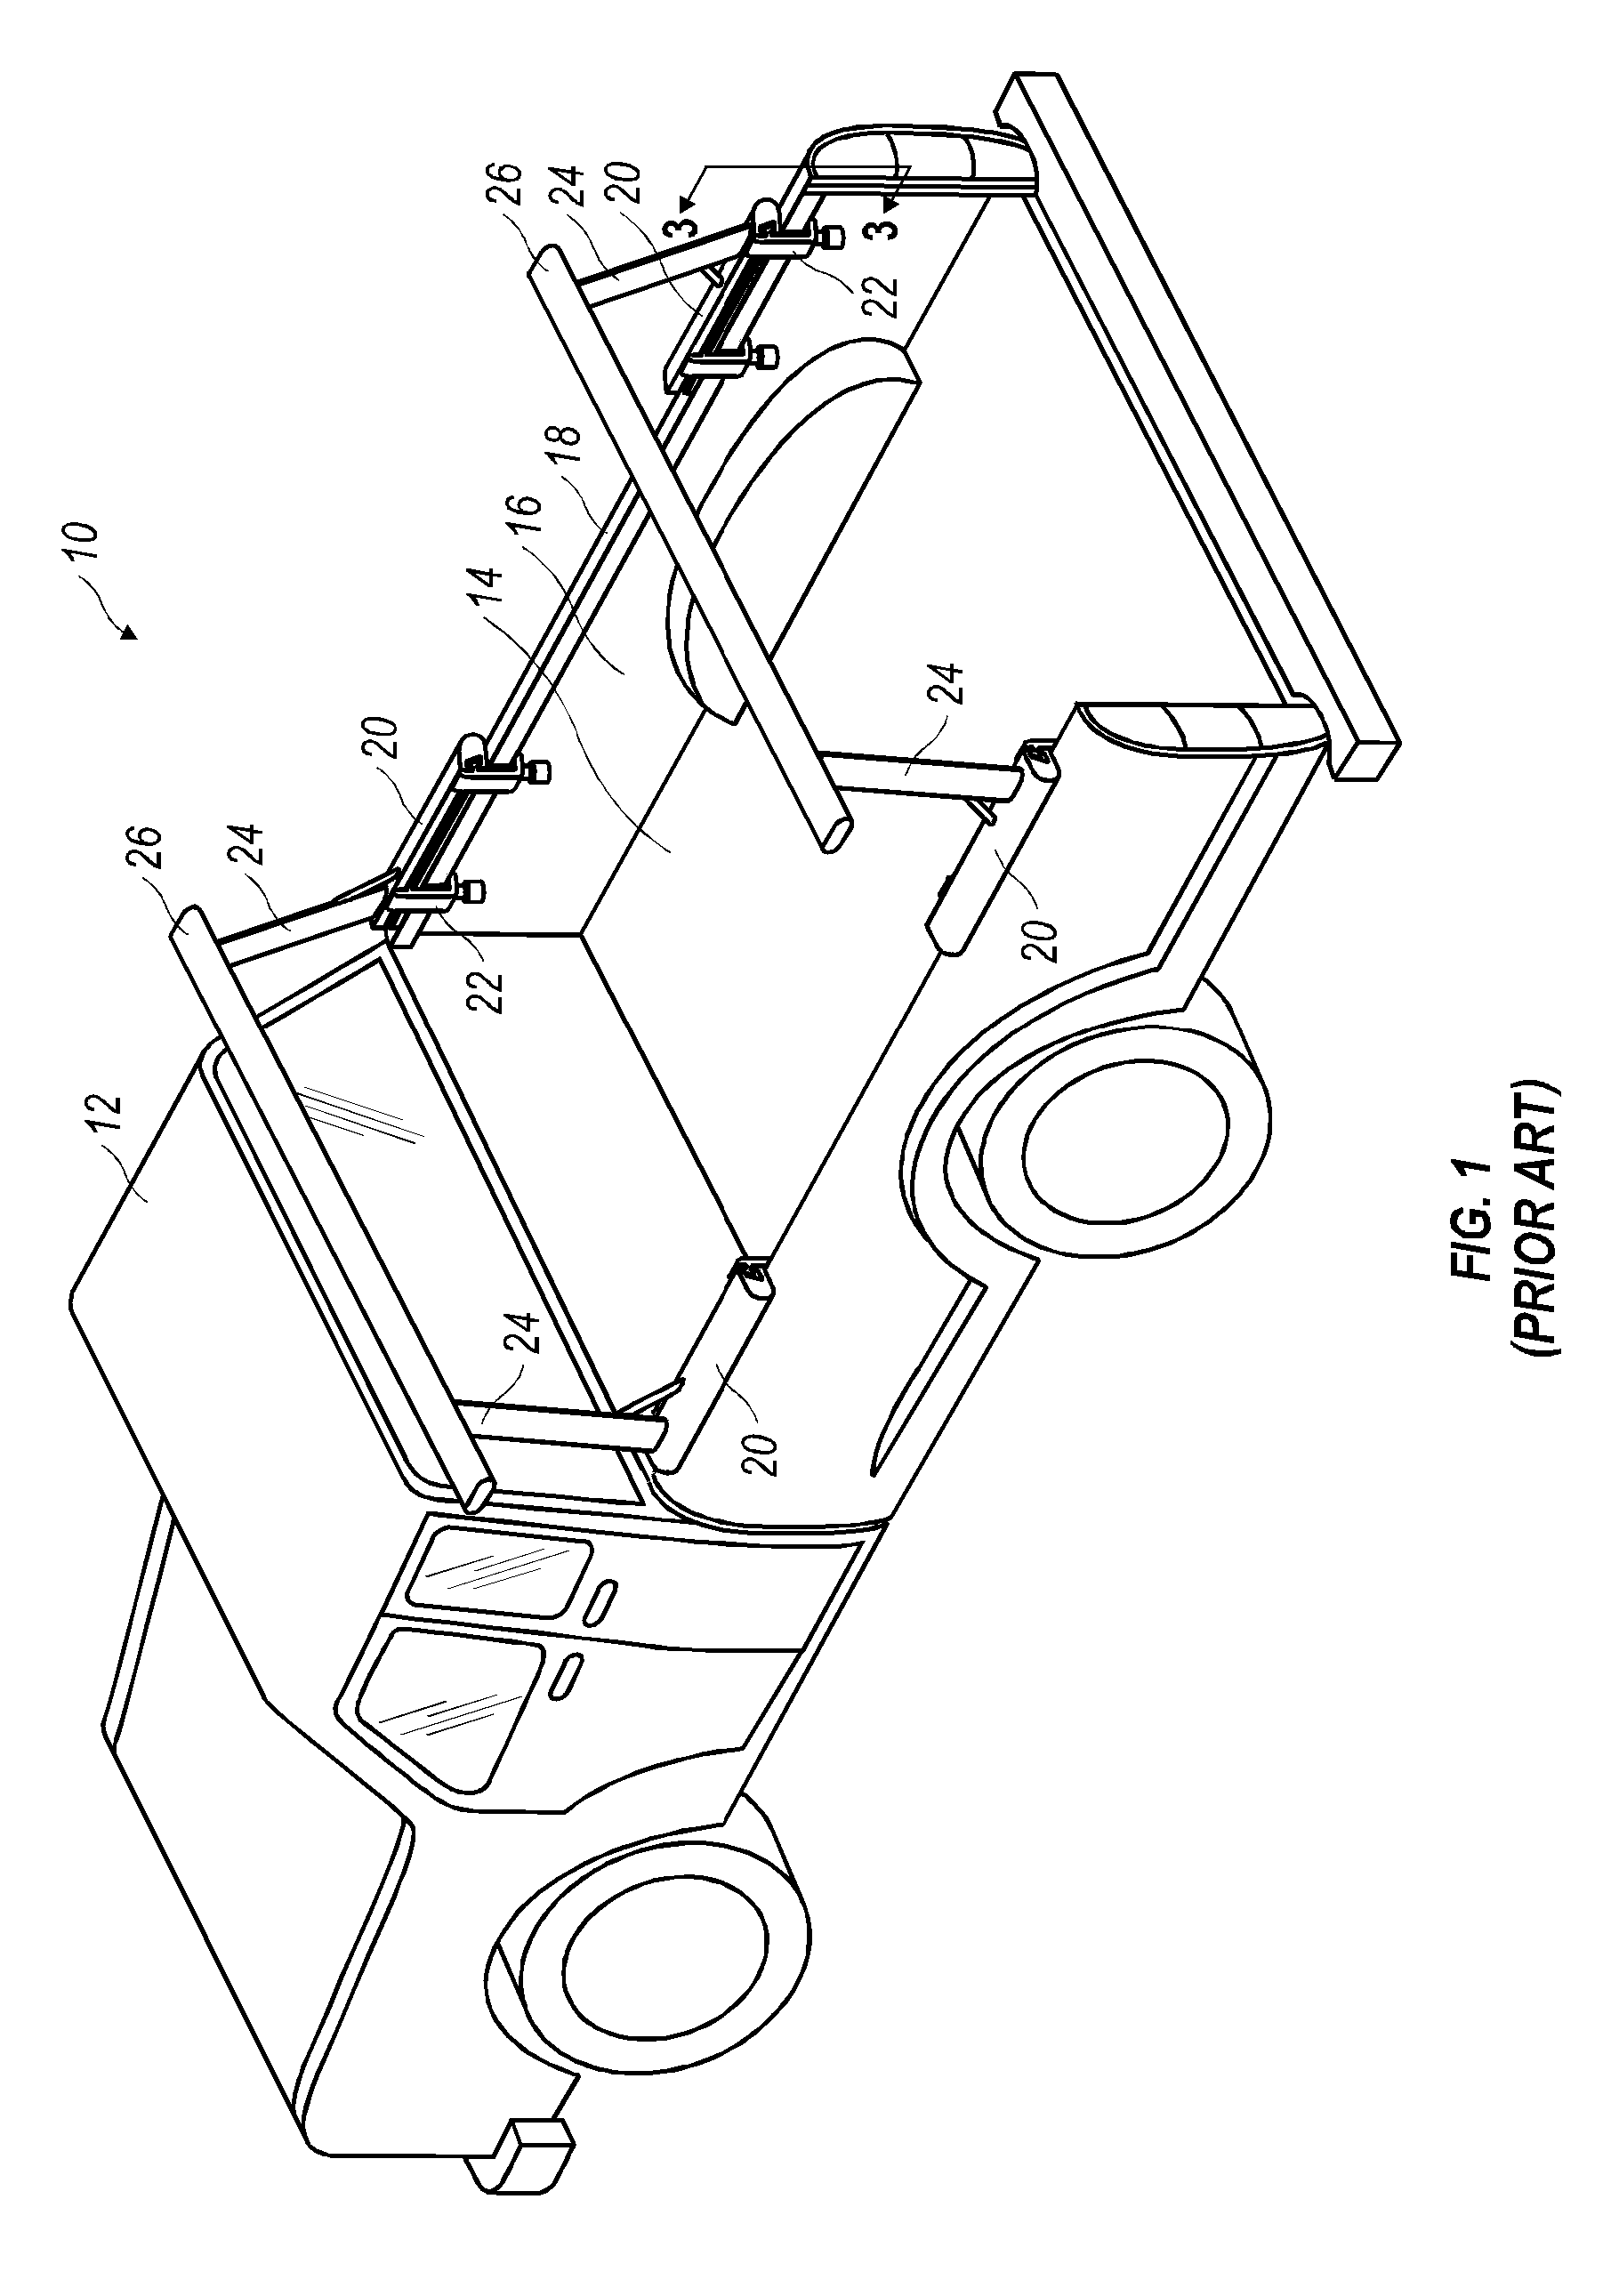 Load carrier arrangement for a vehicle bed comprising an internal bed rail system